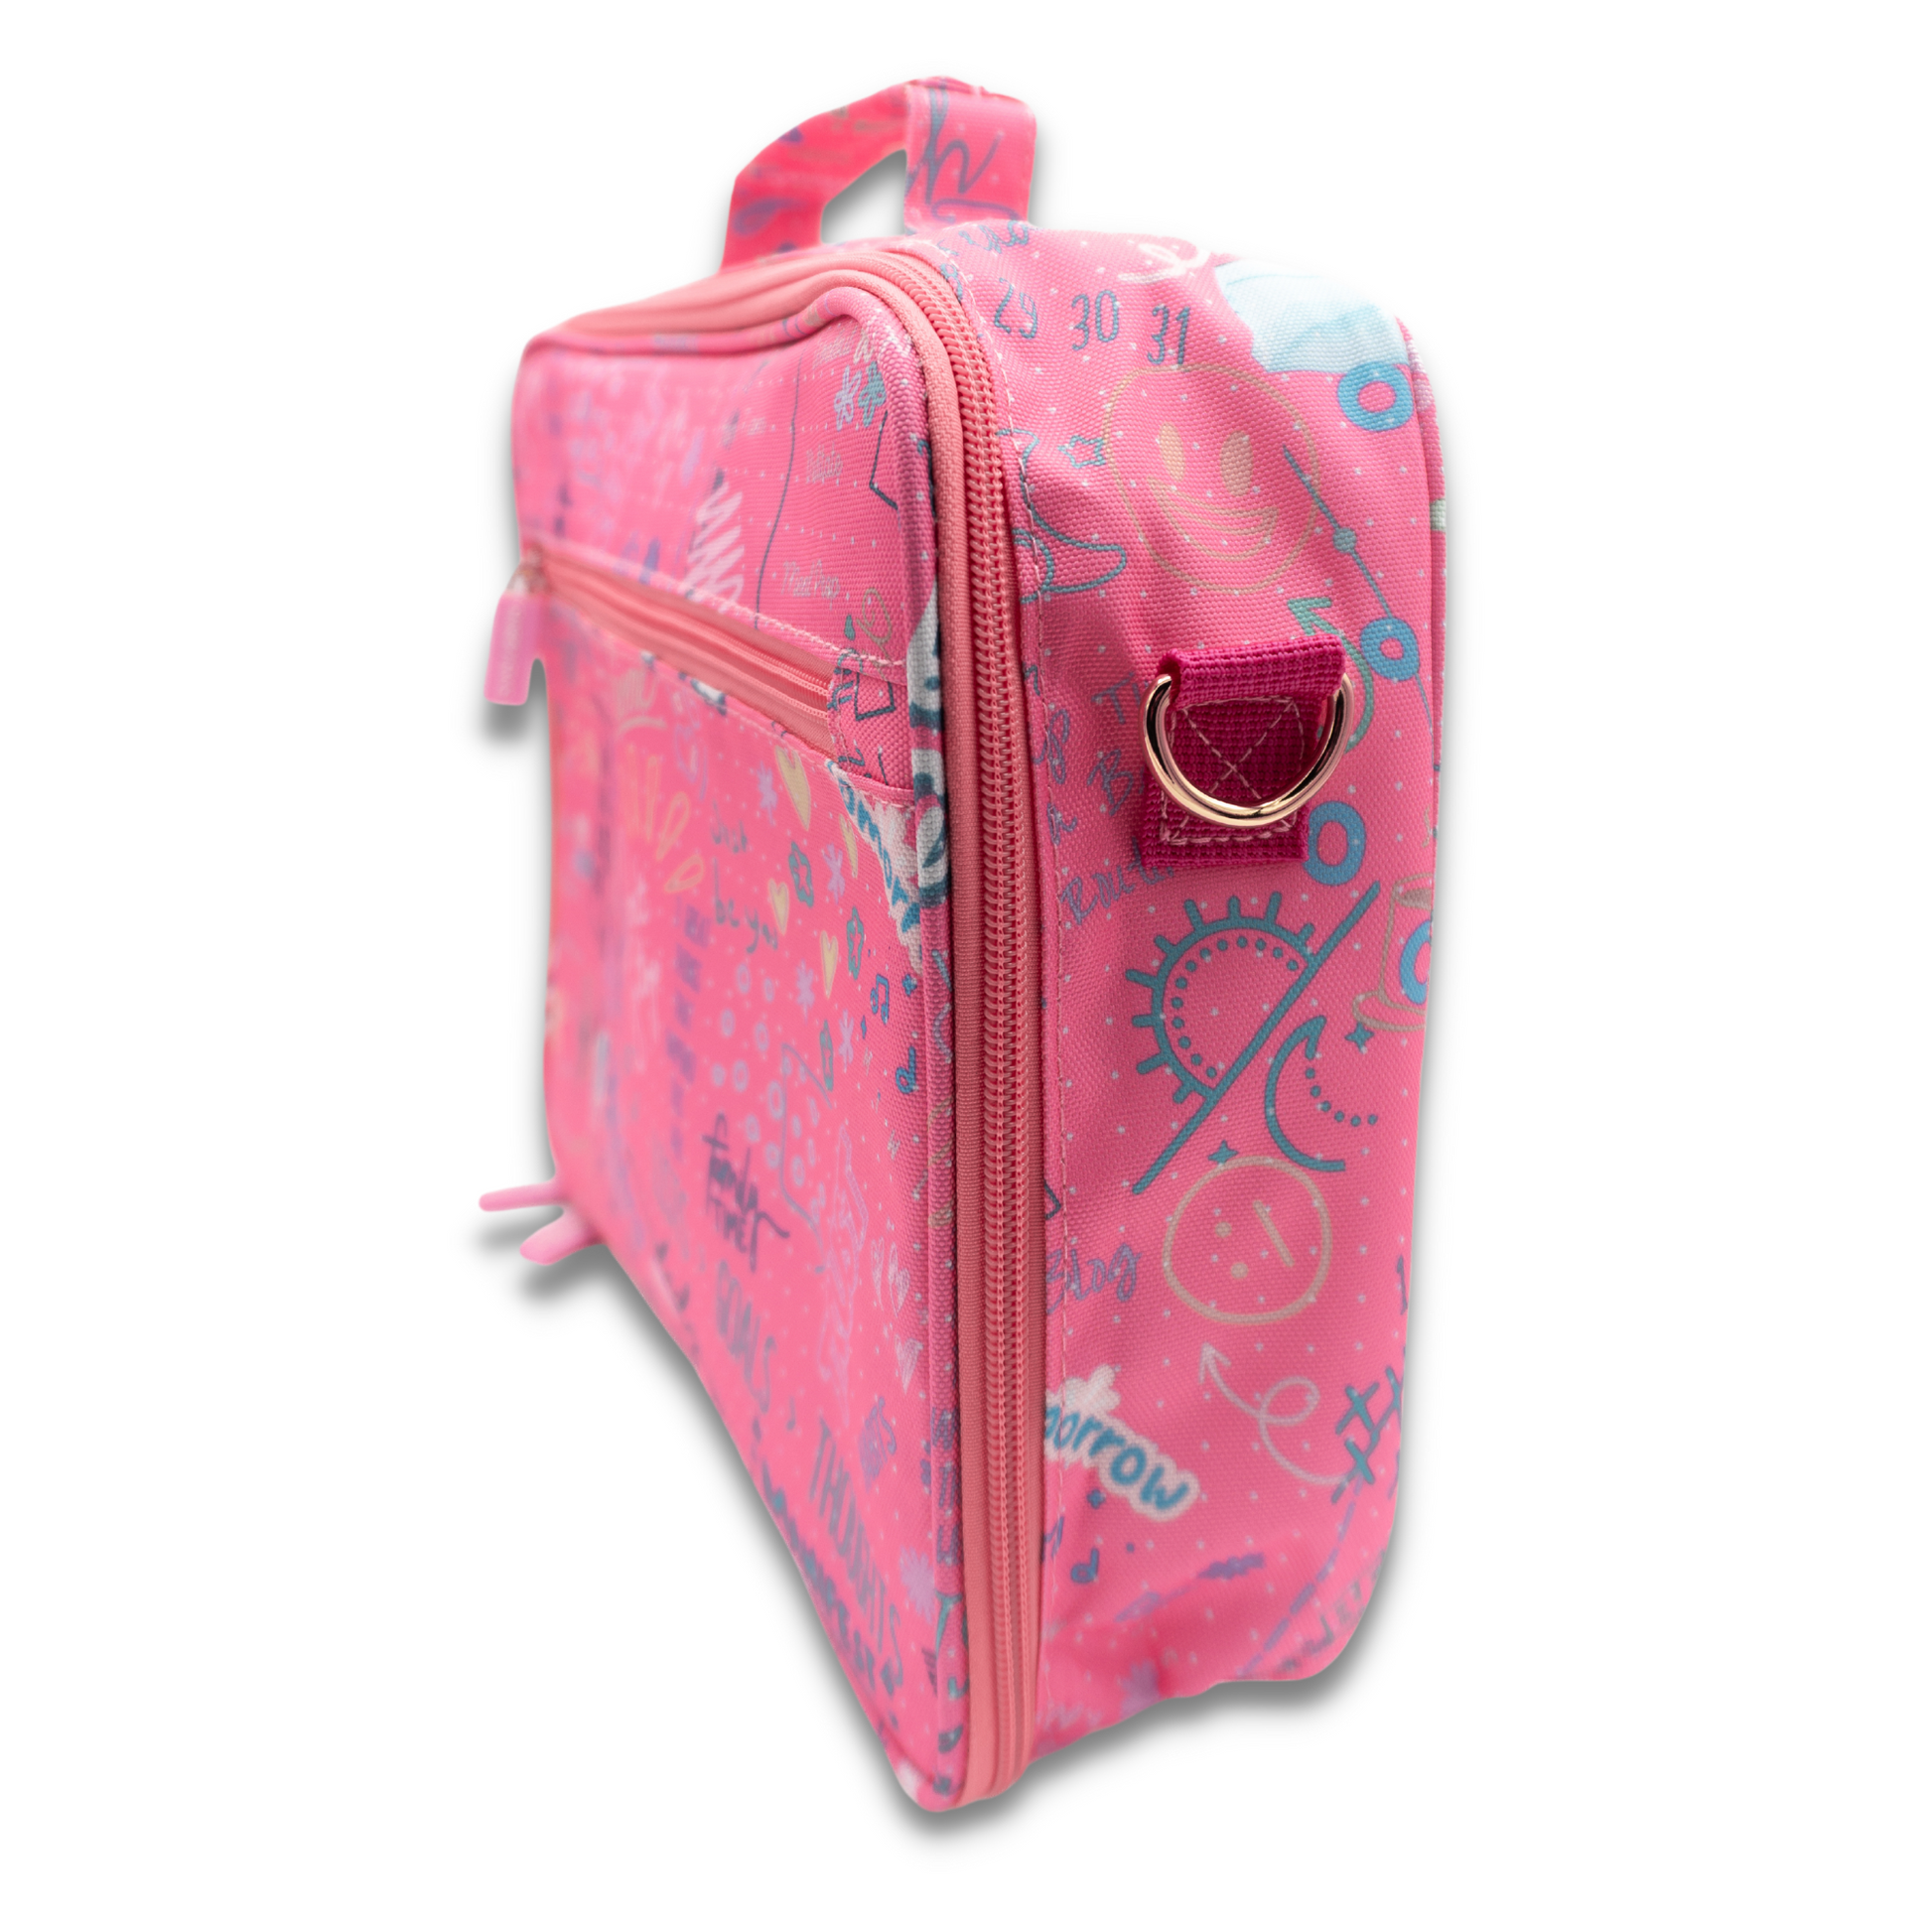 Side view of pink travel planner case